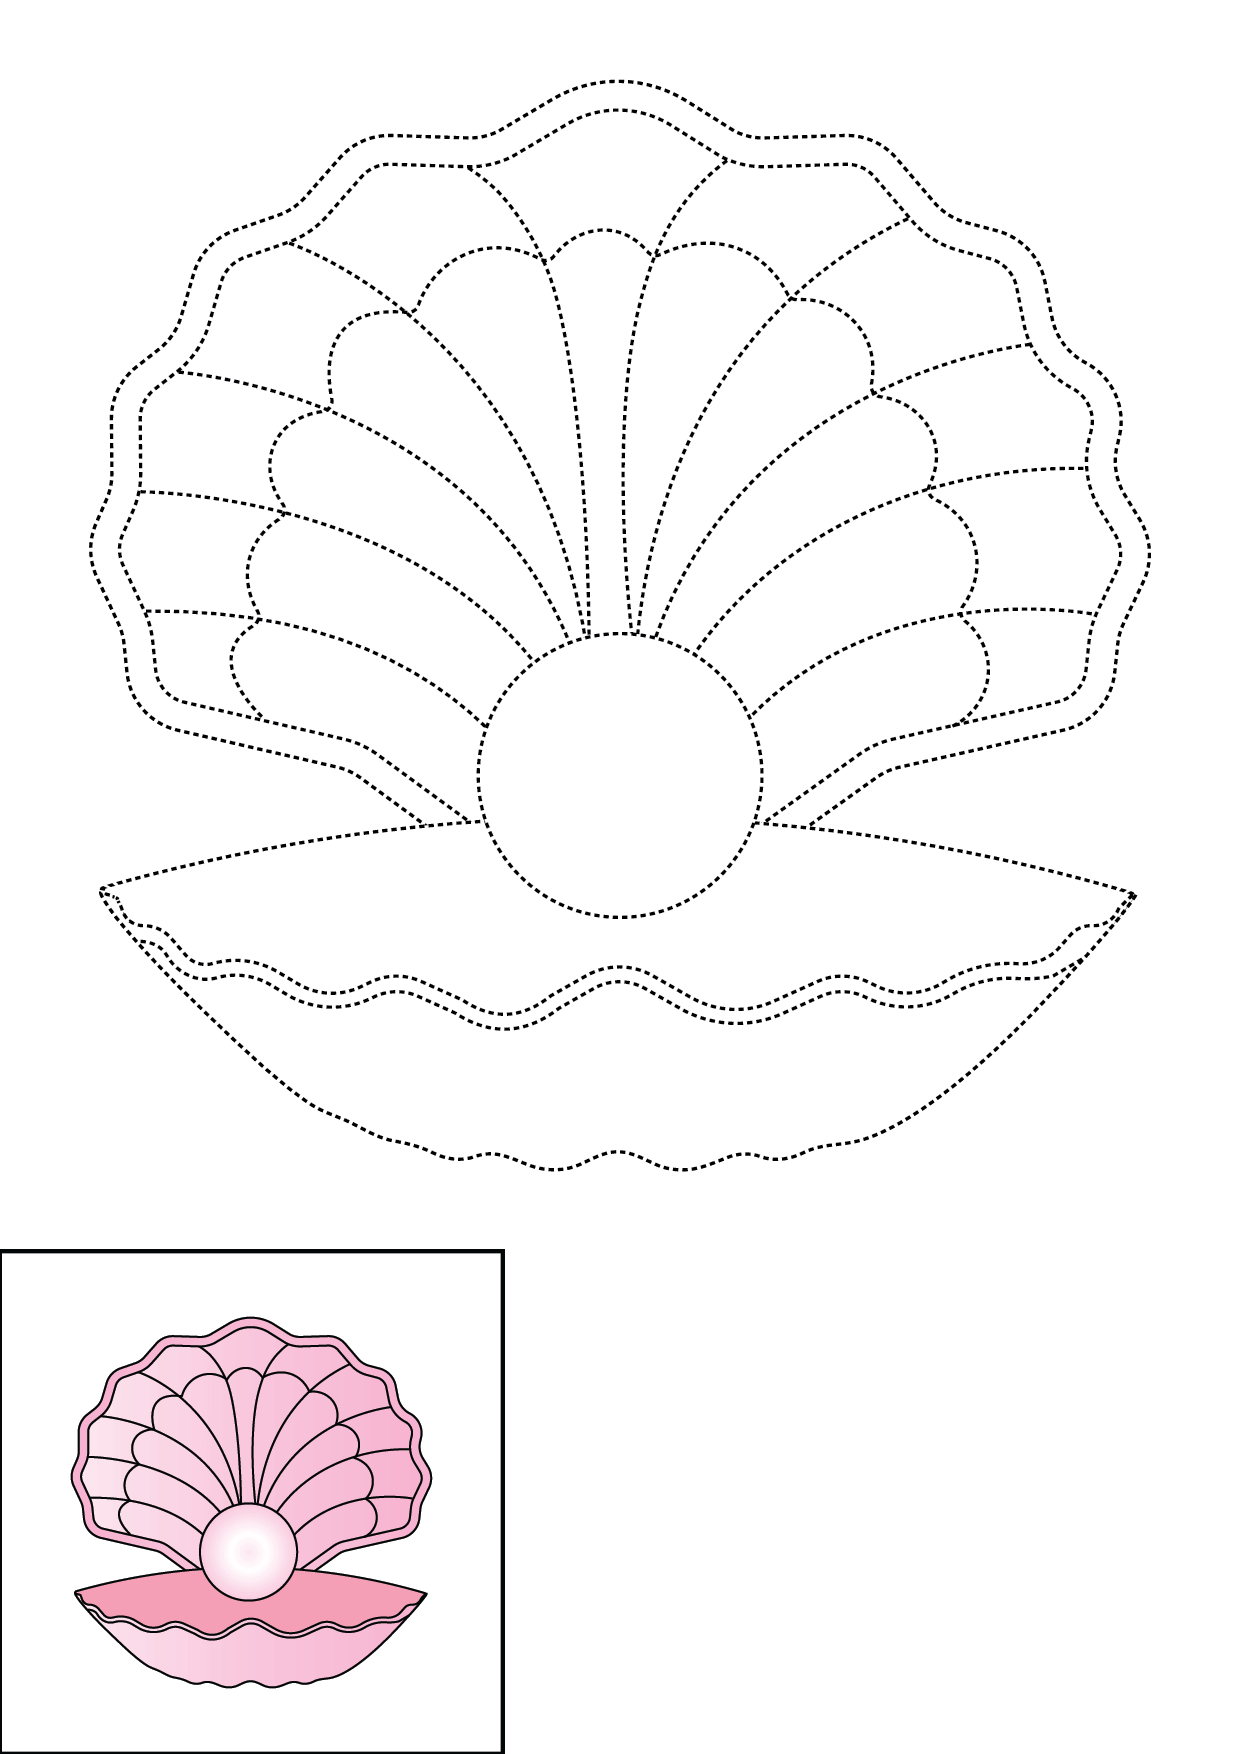 How to Draw A Seashell Step by Step Printable Dotted